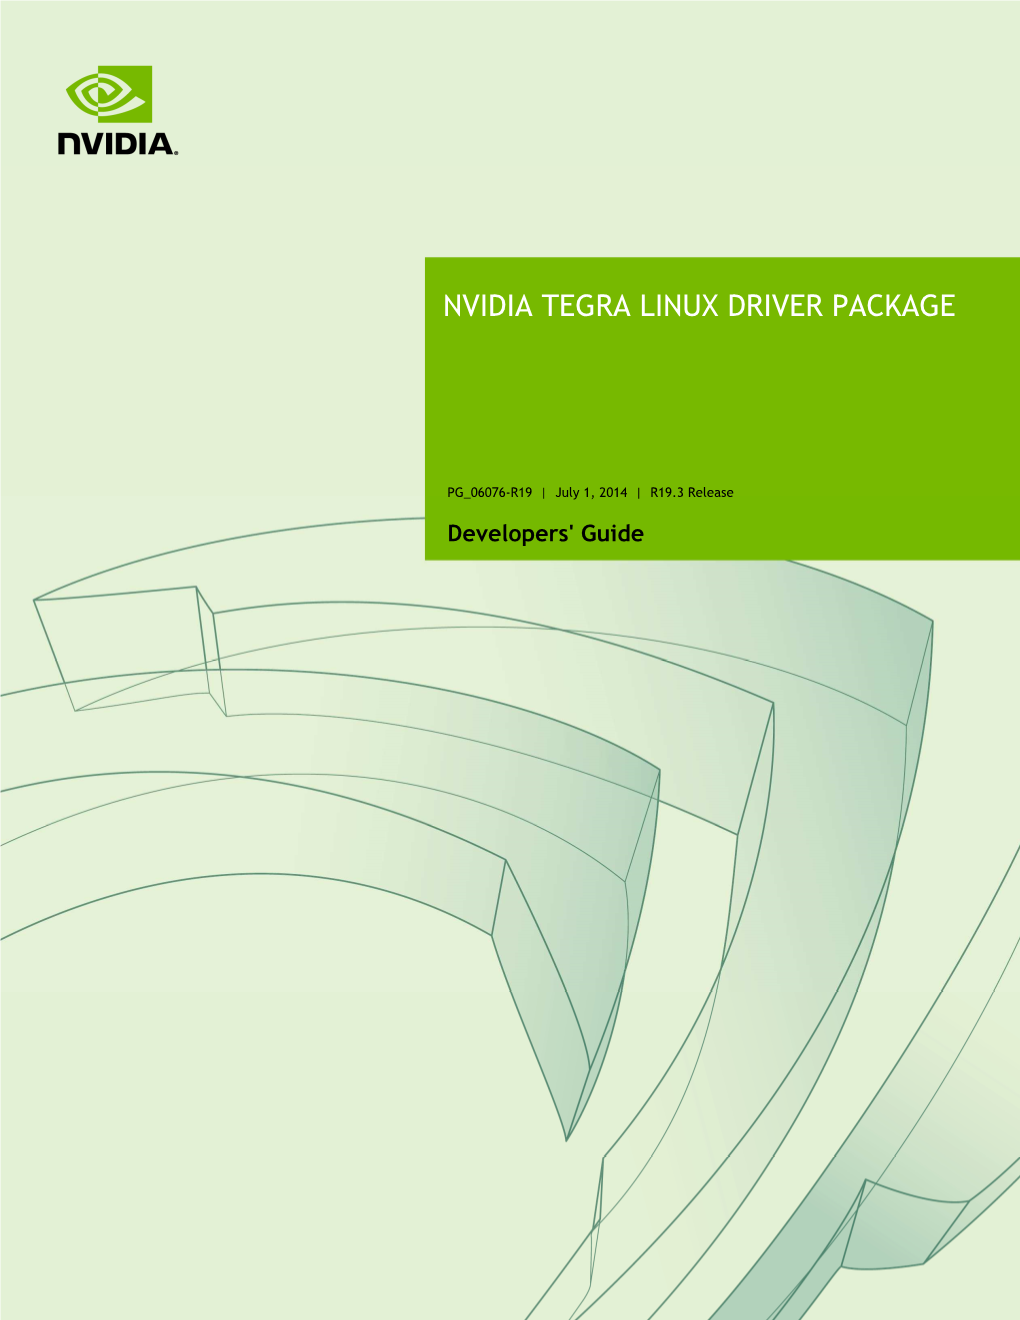 NVIDIA Tegra Linux Driver Package Developers' Guide